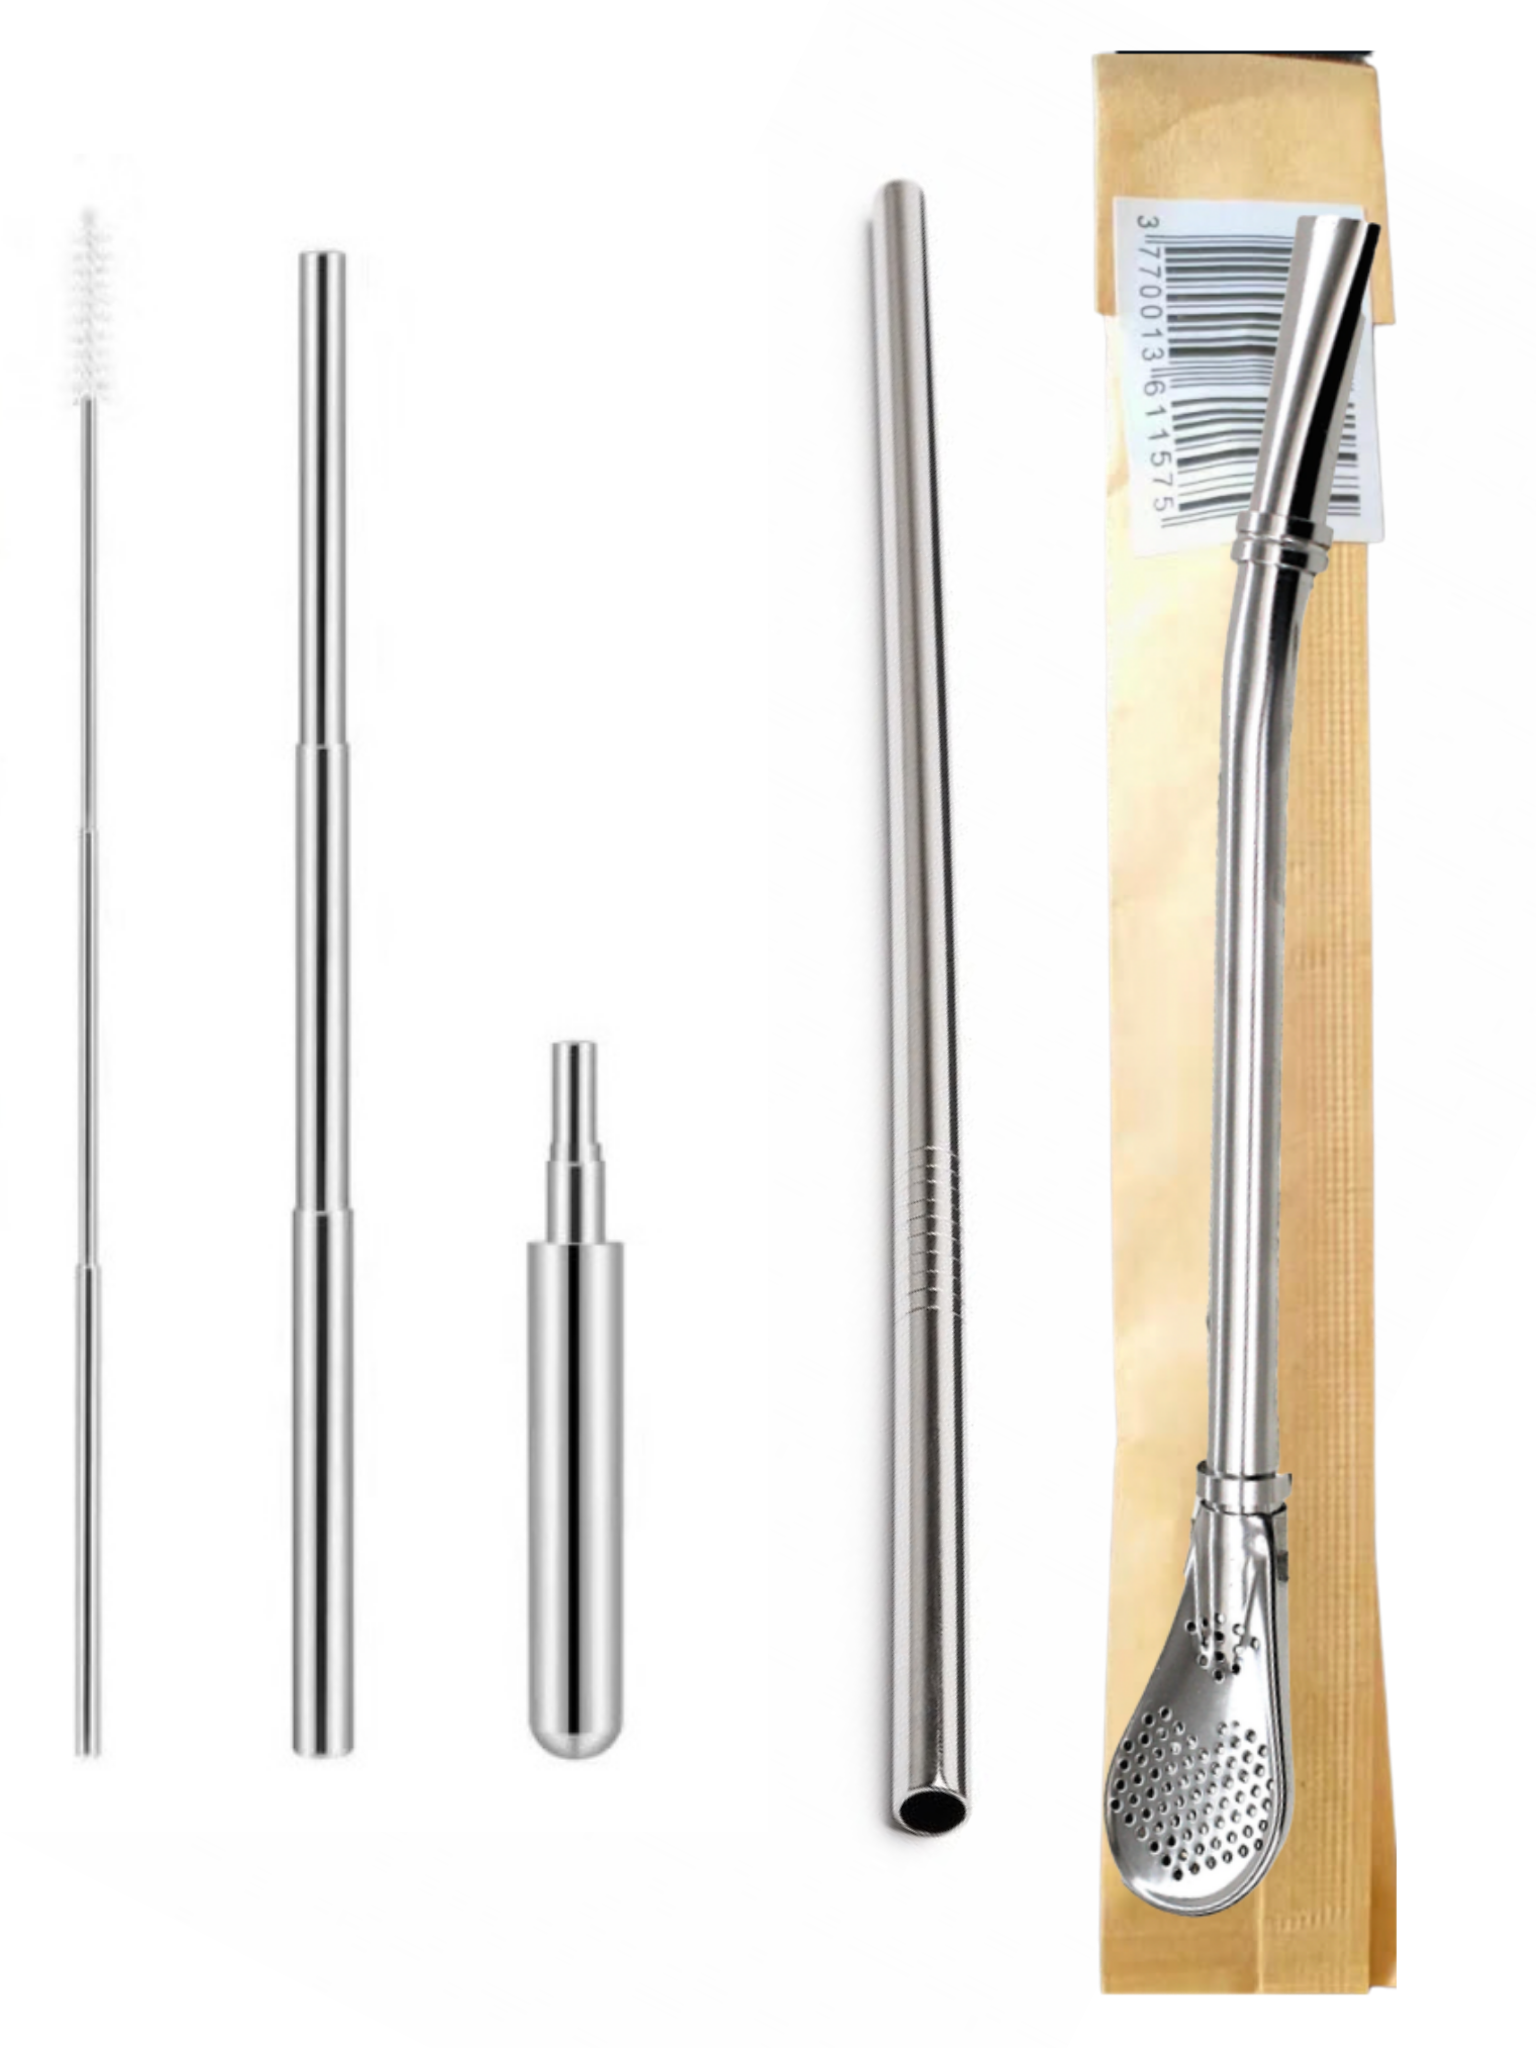 which size of stainless steel straws to choose